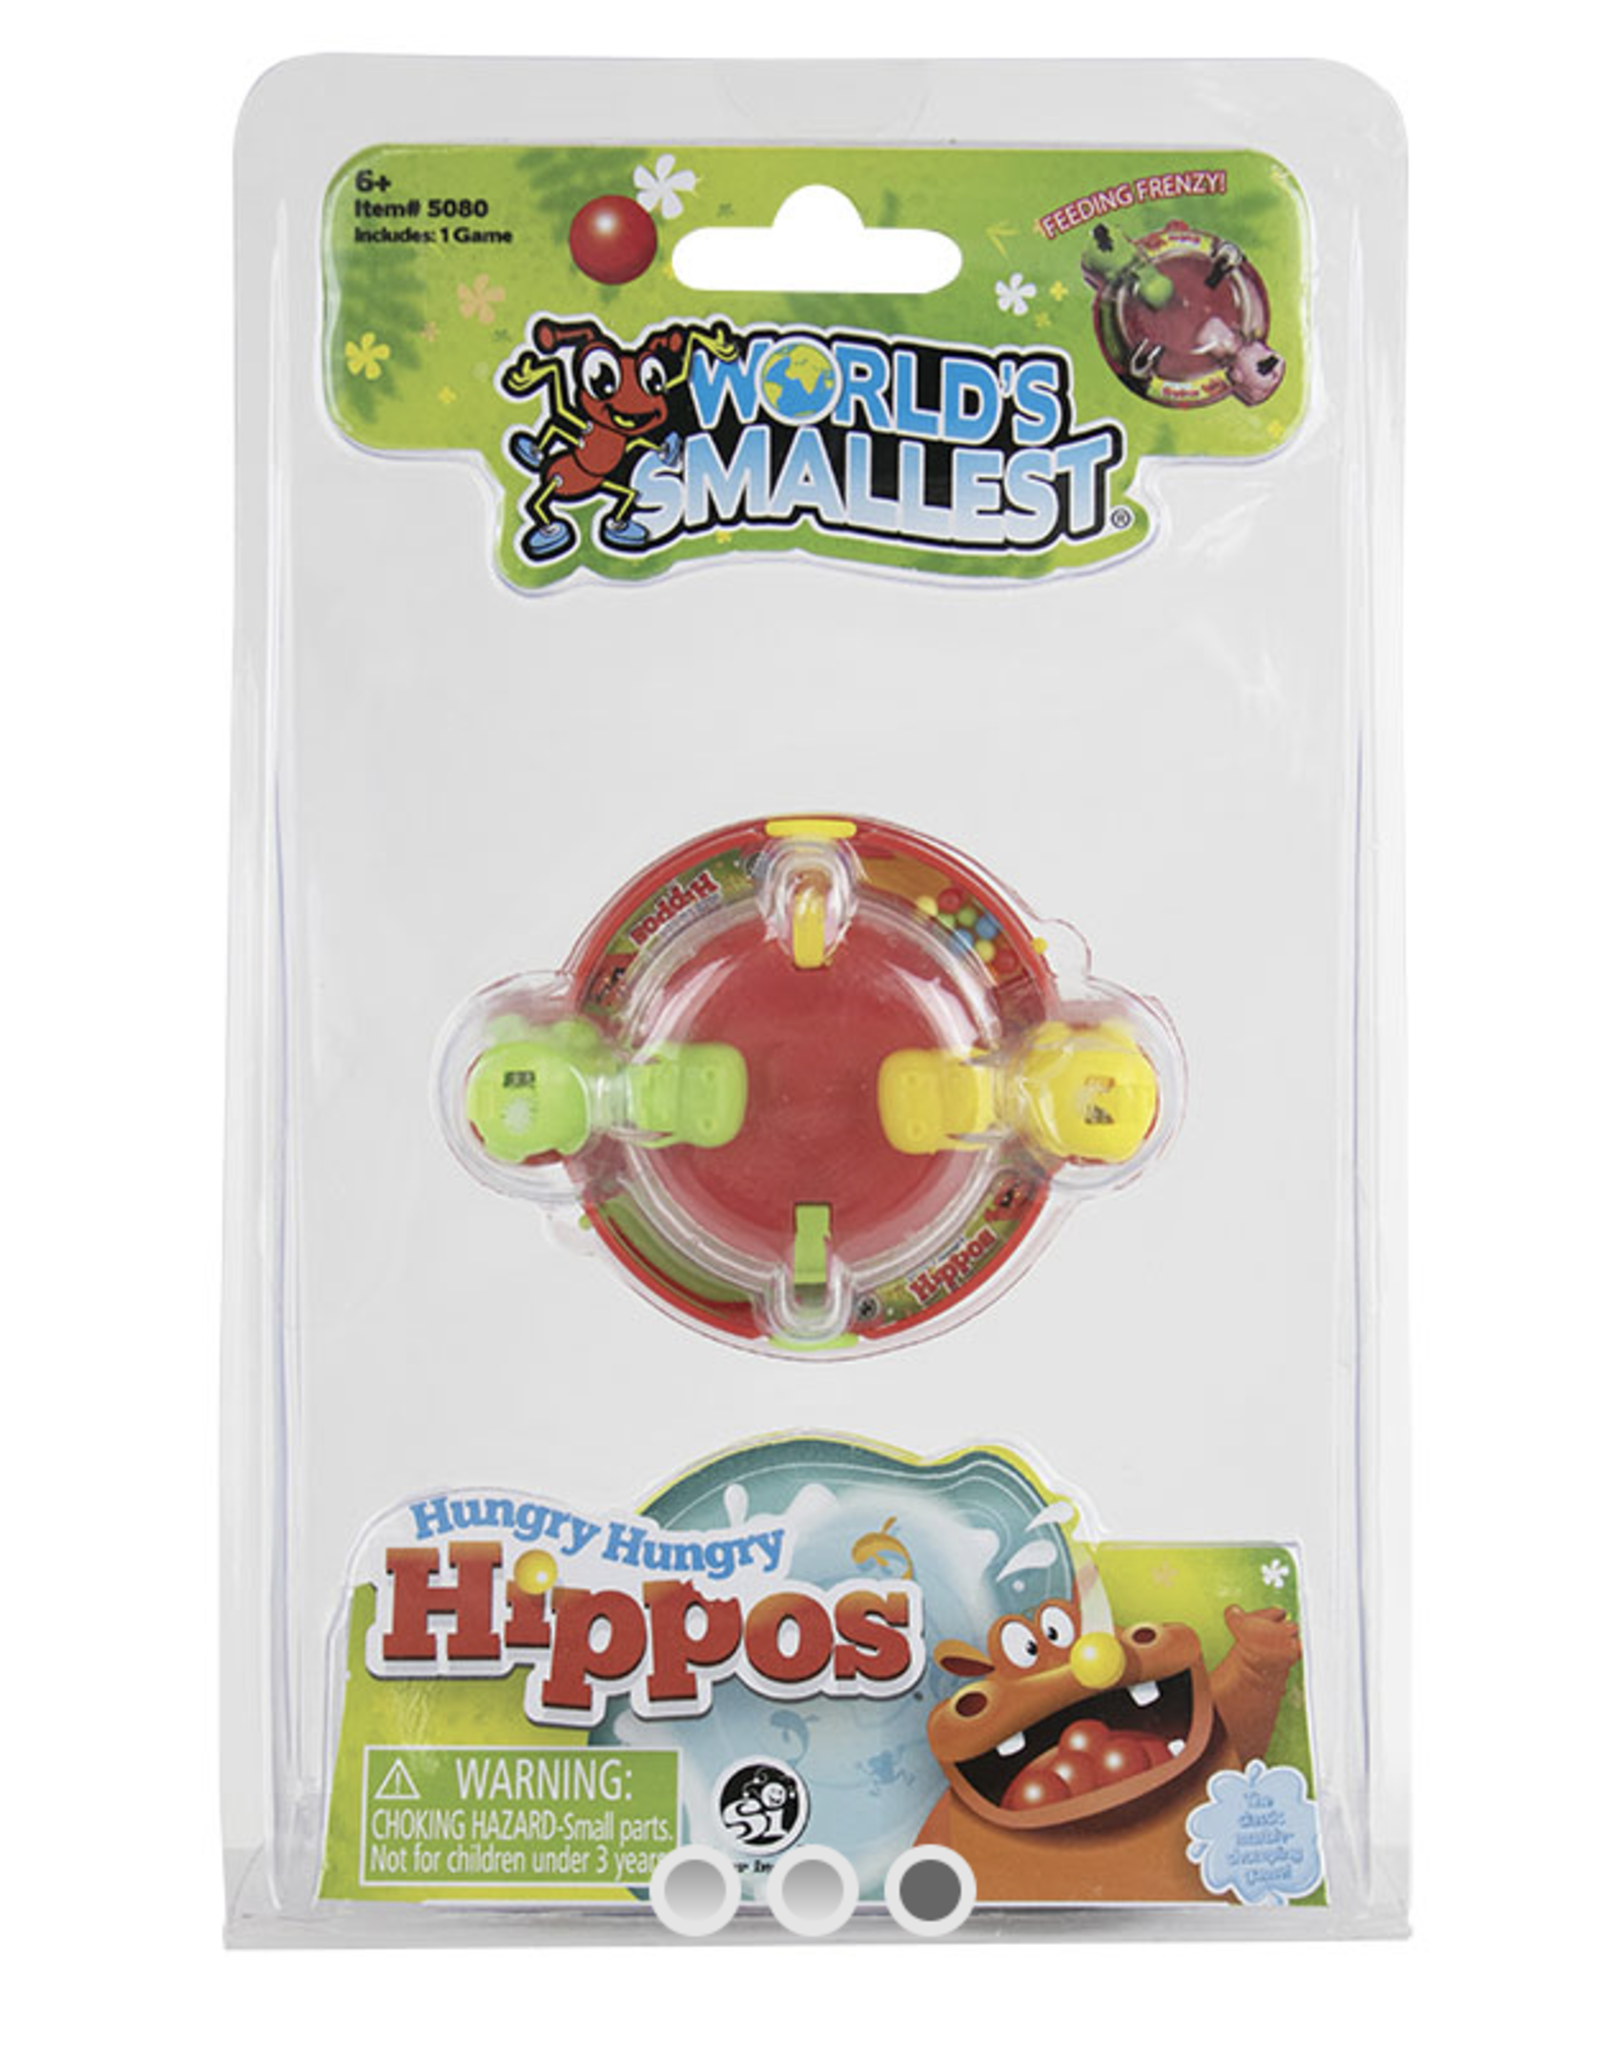 Super Impulse world's smallest- hungry hungry hippos